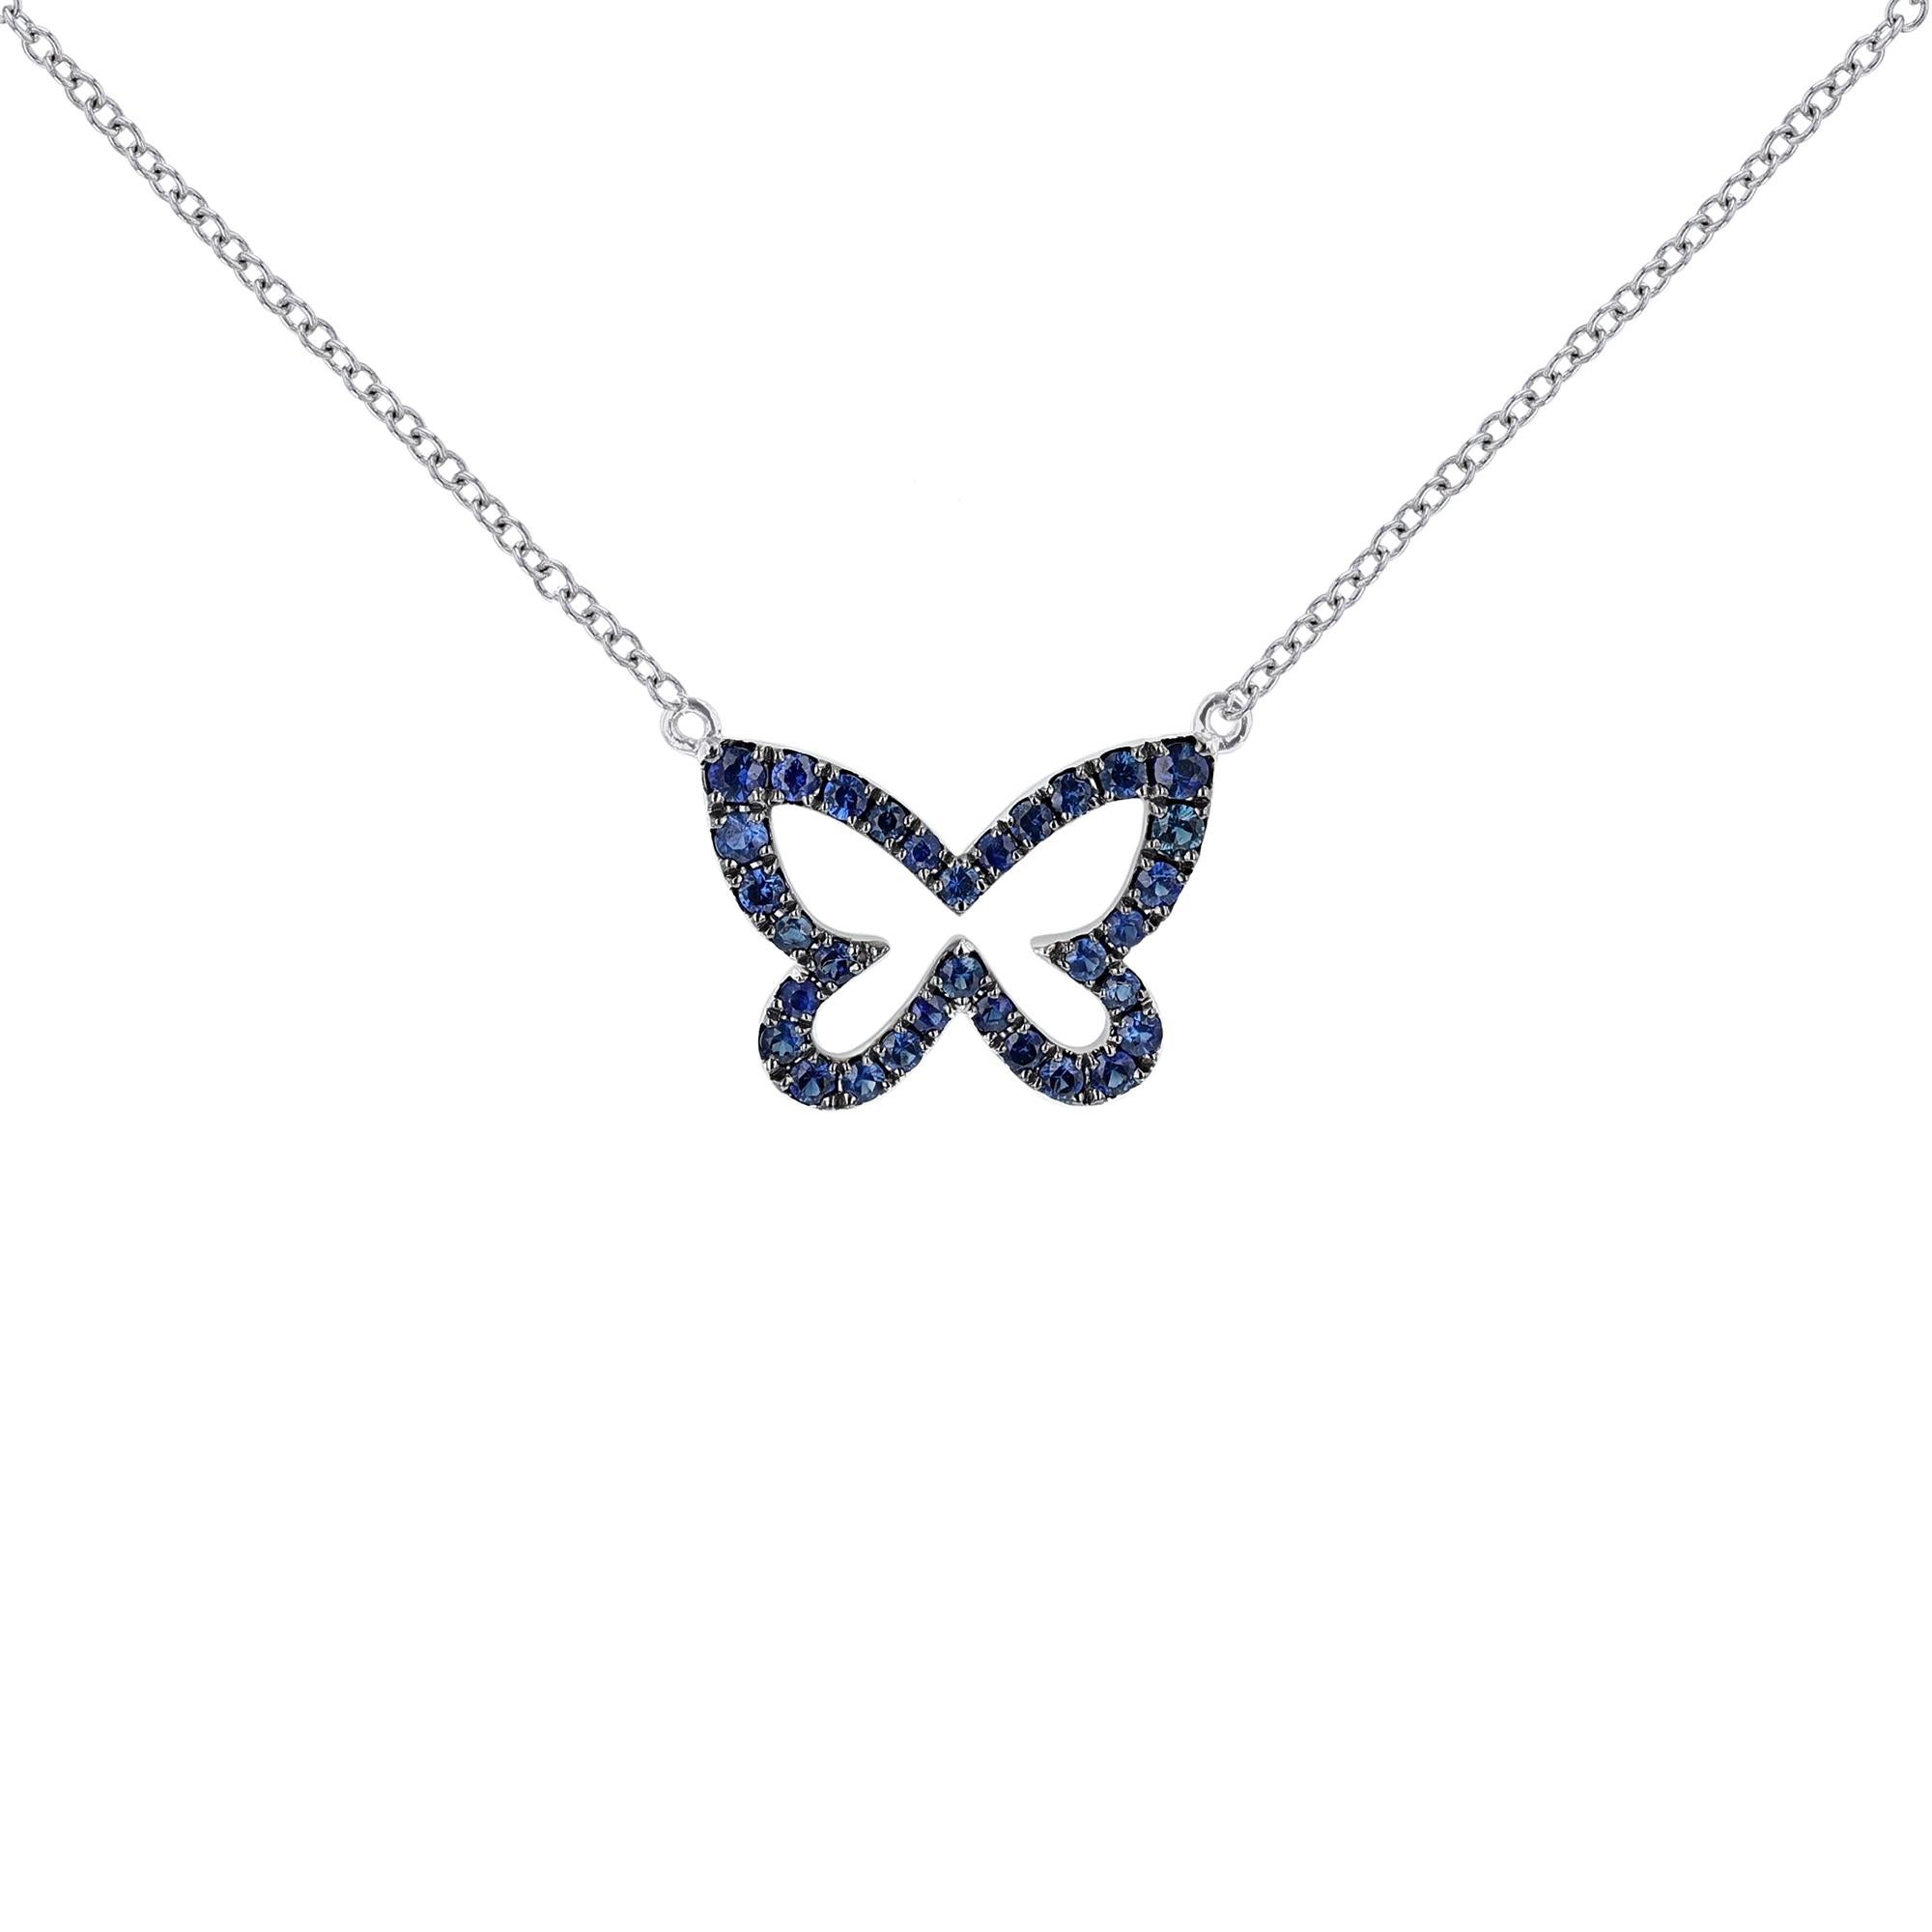 This necklace is made in 18K white gold and features a butterfly pendant of 32 round cut, prong set blue sapphires. With 2 diamond and 2 blue sapphire bezel stations on the chain.  Necklace has a color grade (H). and clarity grade (SI2).  Blue